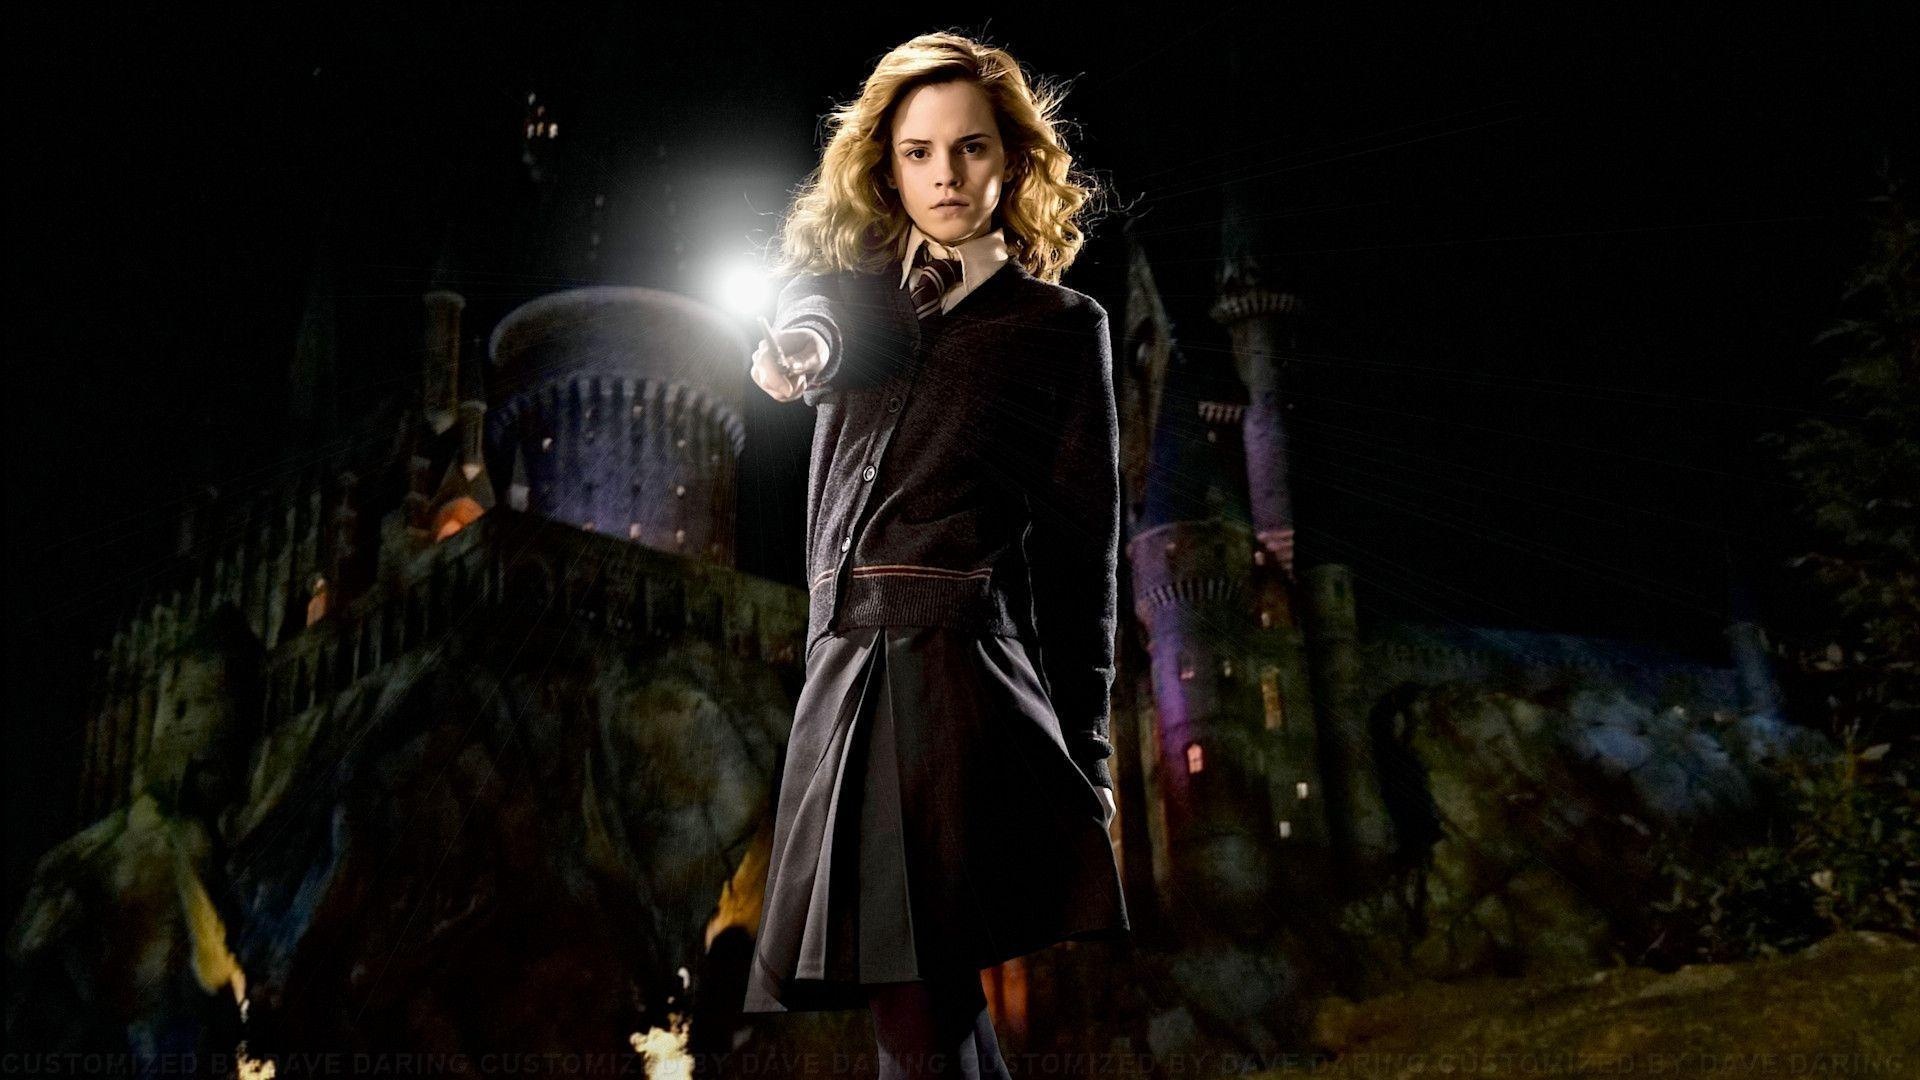 Hermione: The brightest witch of her age, "Harry Potter" films. 1920x1080 Full HD Wallpaper.